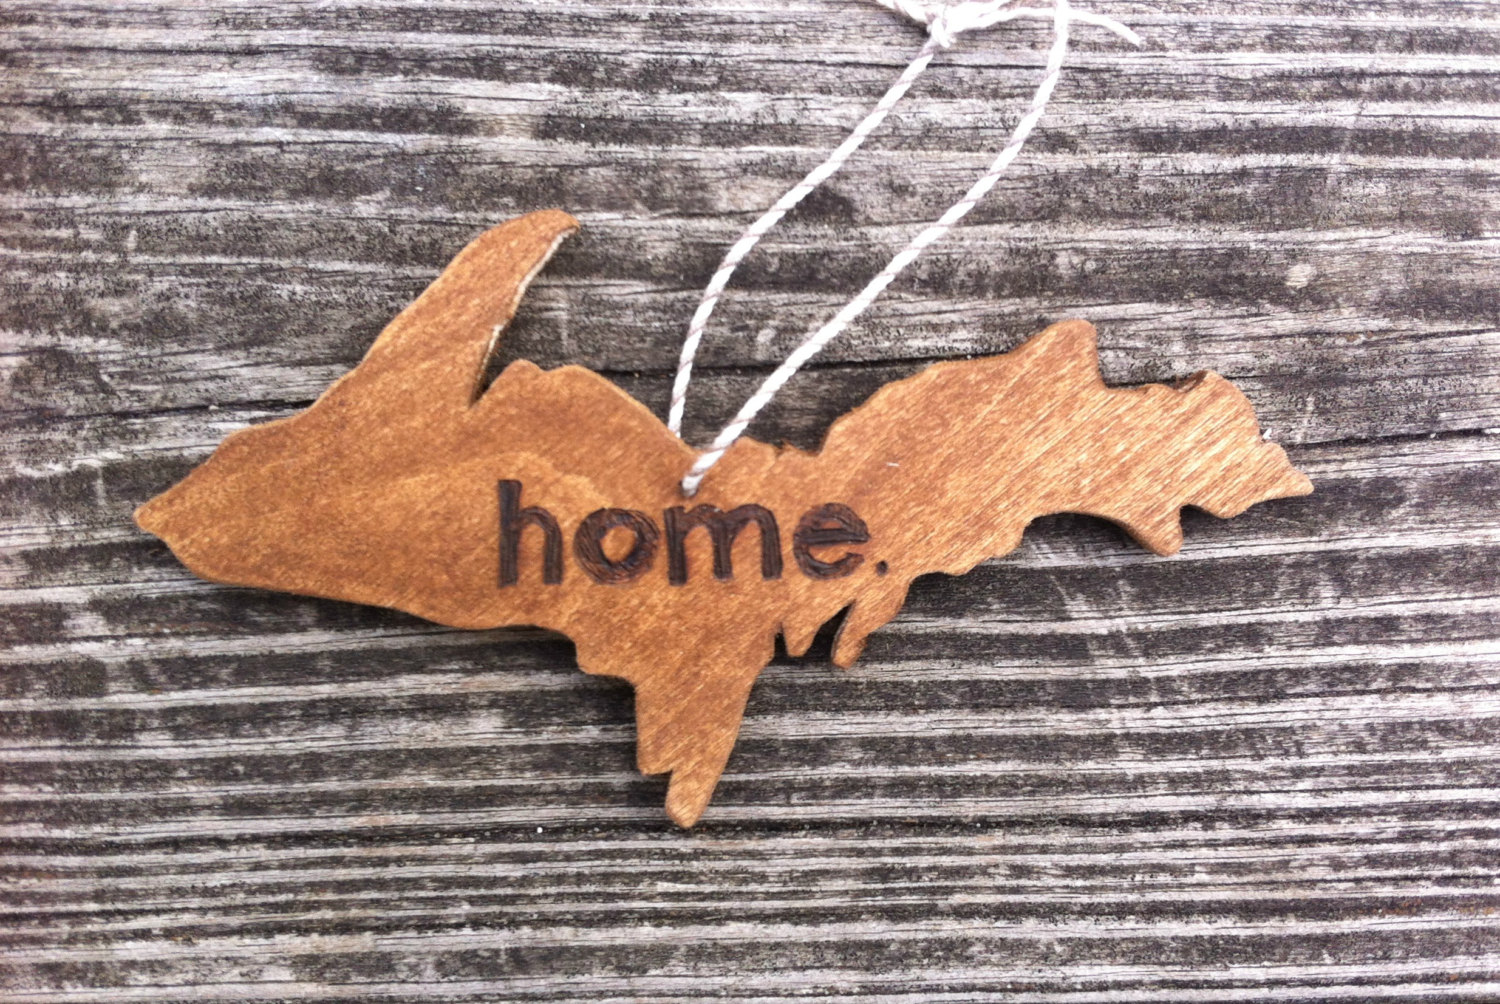 Michigan Gift Idea: Handmade Home Decor From Wood By Al // Featured - Michigan Upper Peninsula "Home" Ornament (via Wading in Big Shoes)